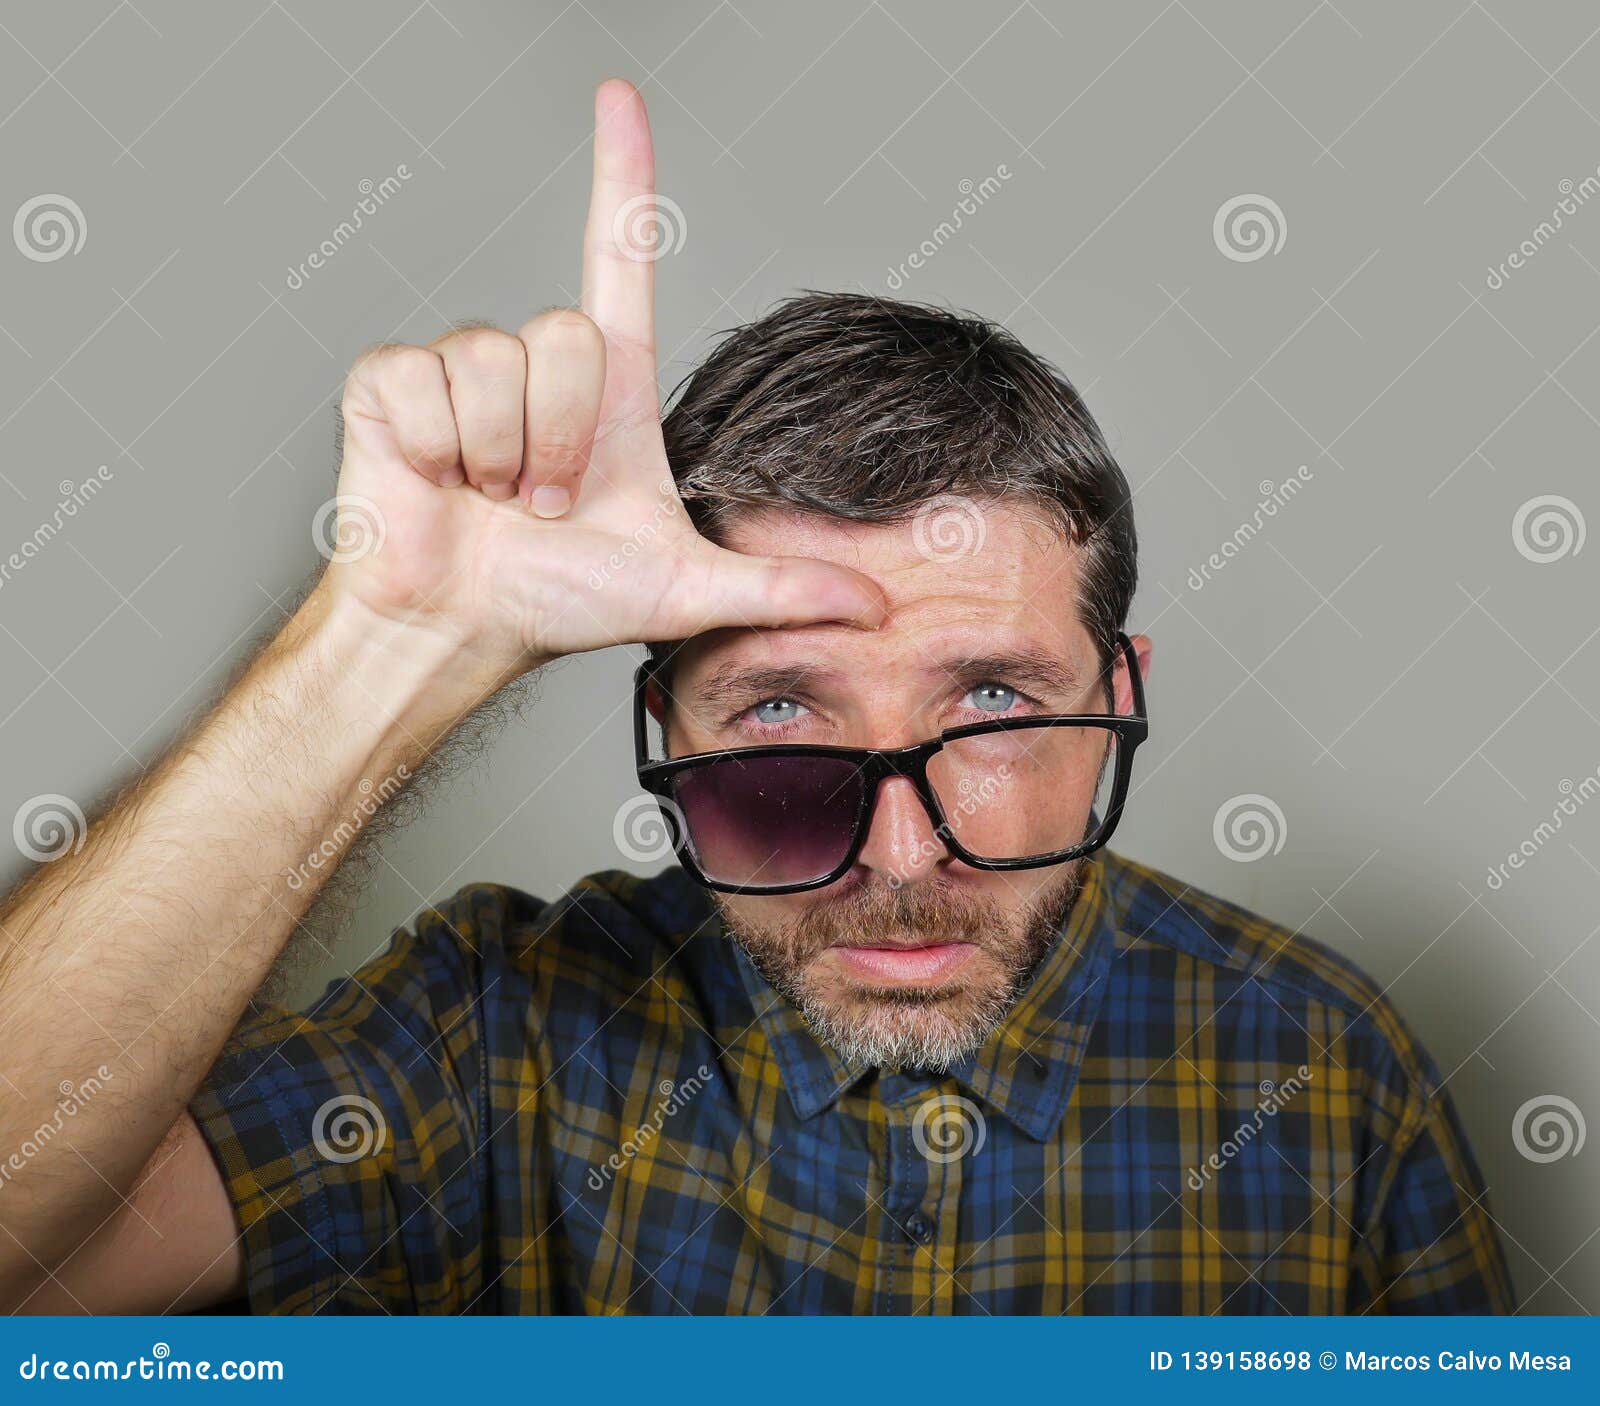 Sad and Ridiculous Man in Weird Broken Nerdy Glasses Doing Loser Sign with  Hand and Fingers on His Forehead with Funny Depressed Stock Photo - Image  of sarcasm, insult: 139158698